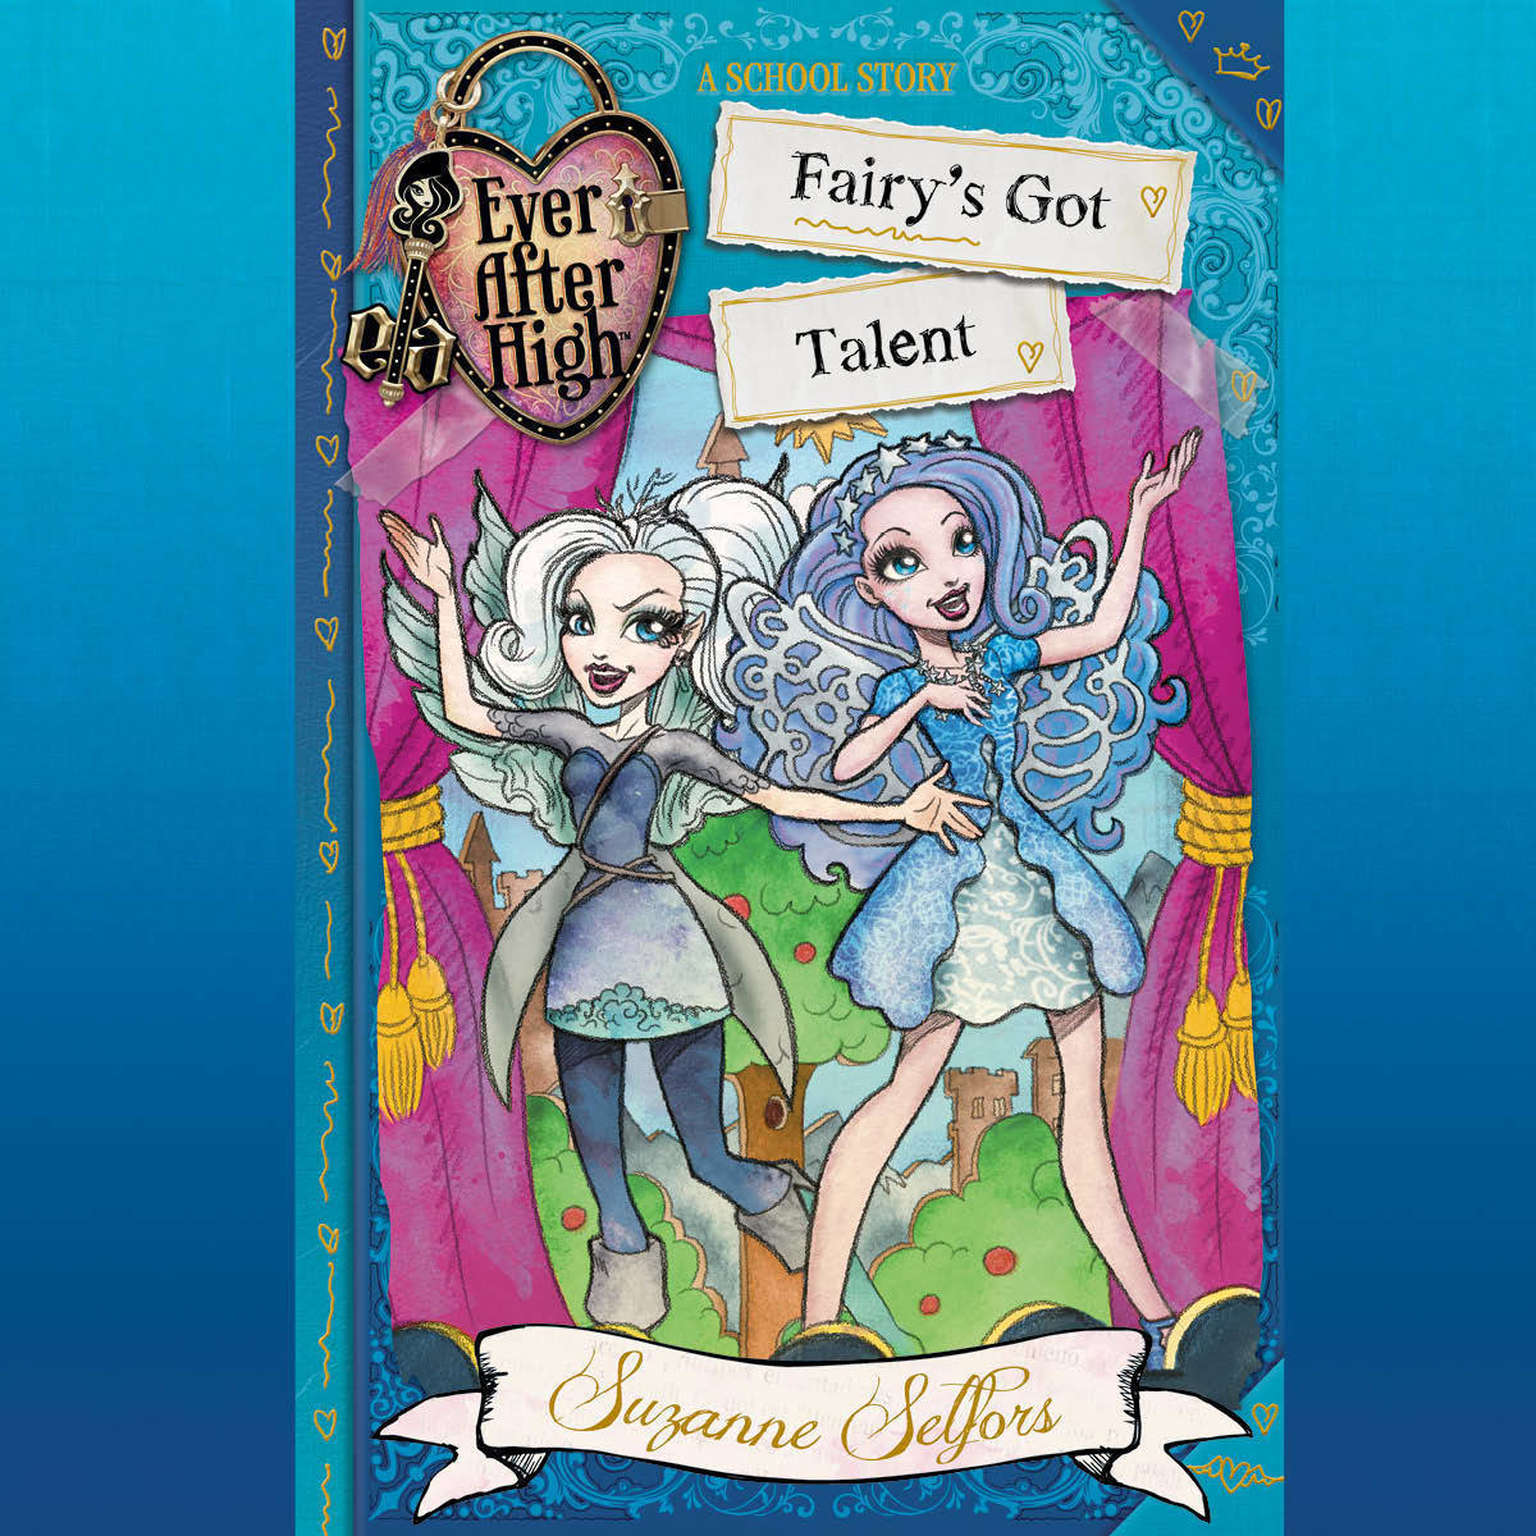 Ever After High: Fairys Got Talent Audiobook, by Suzanne Selfors